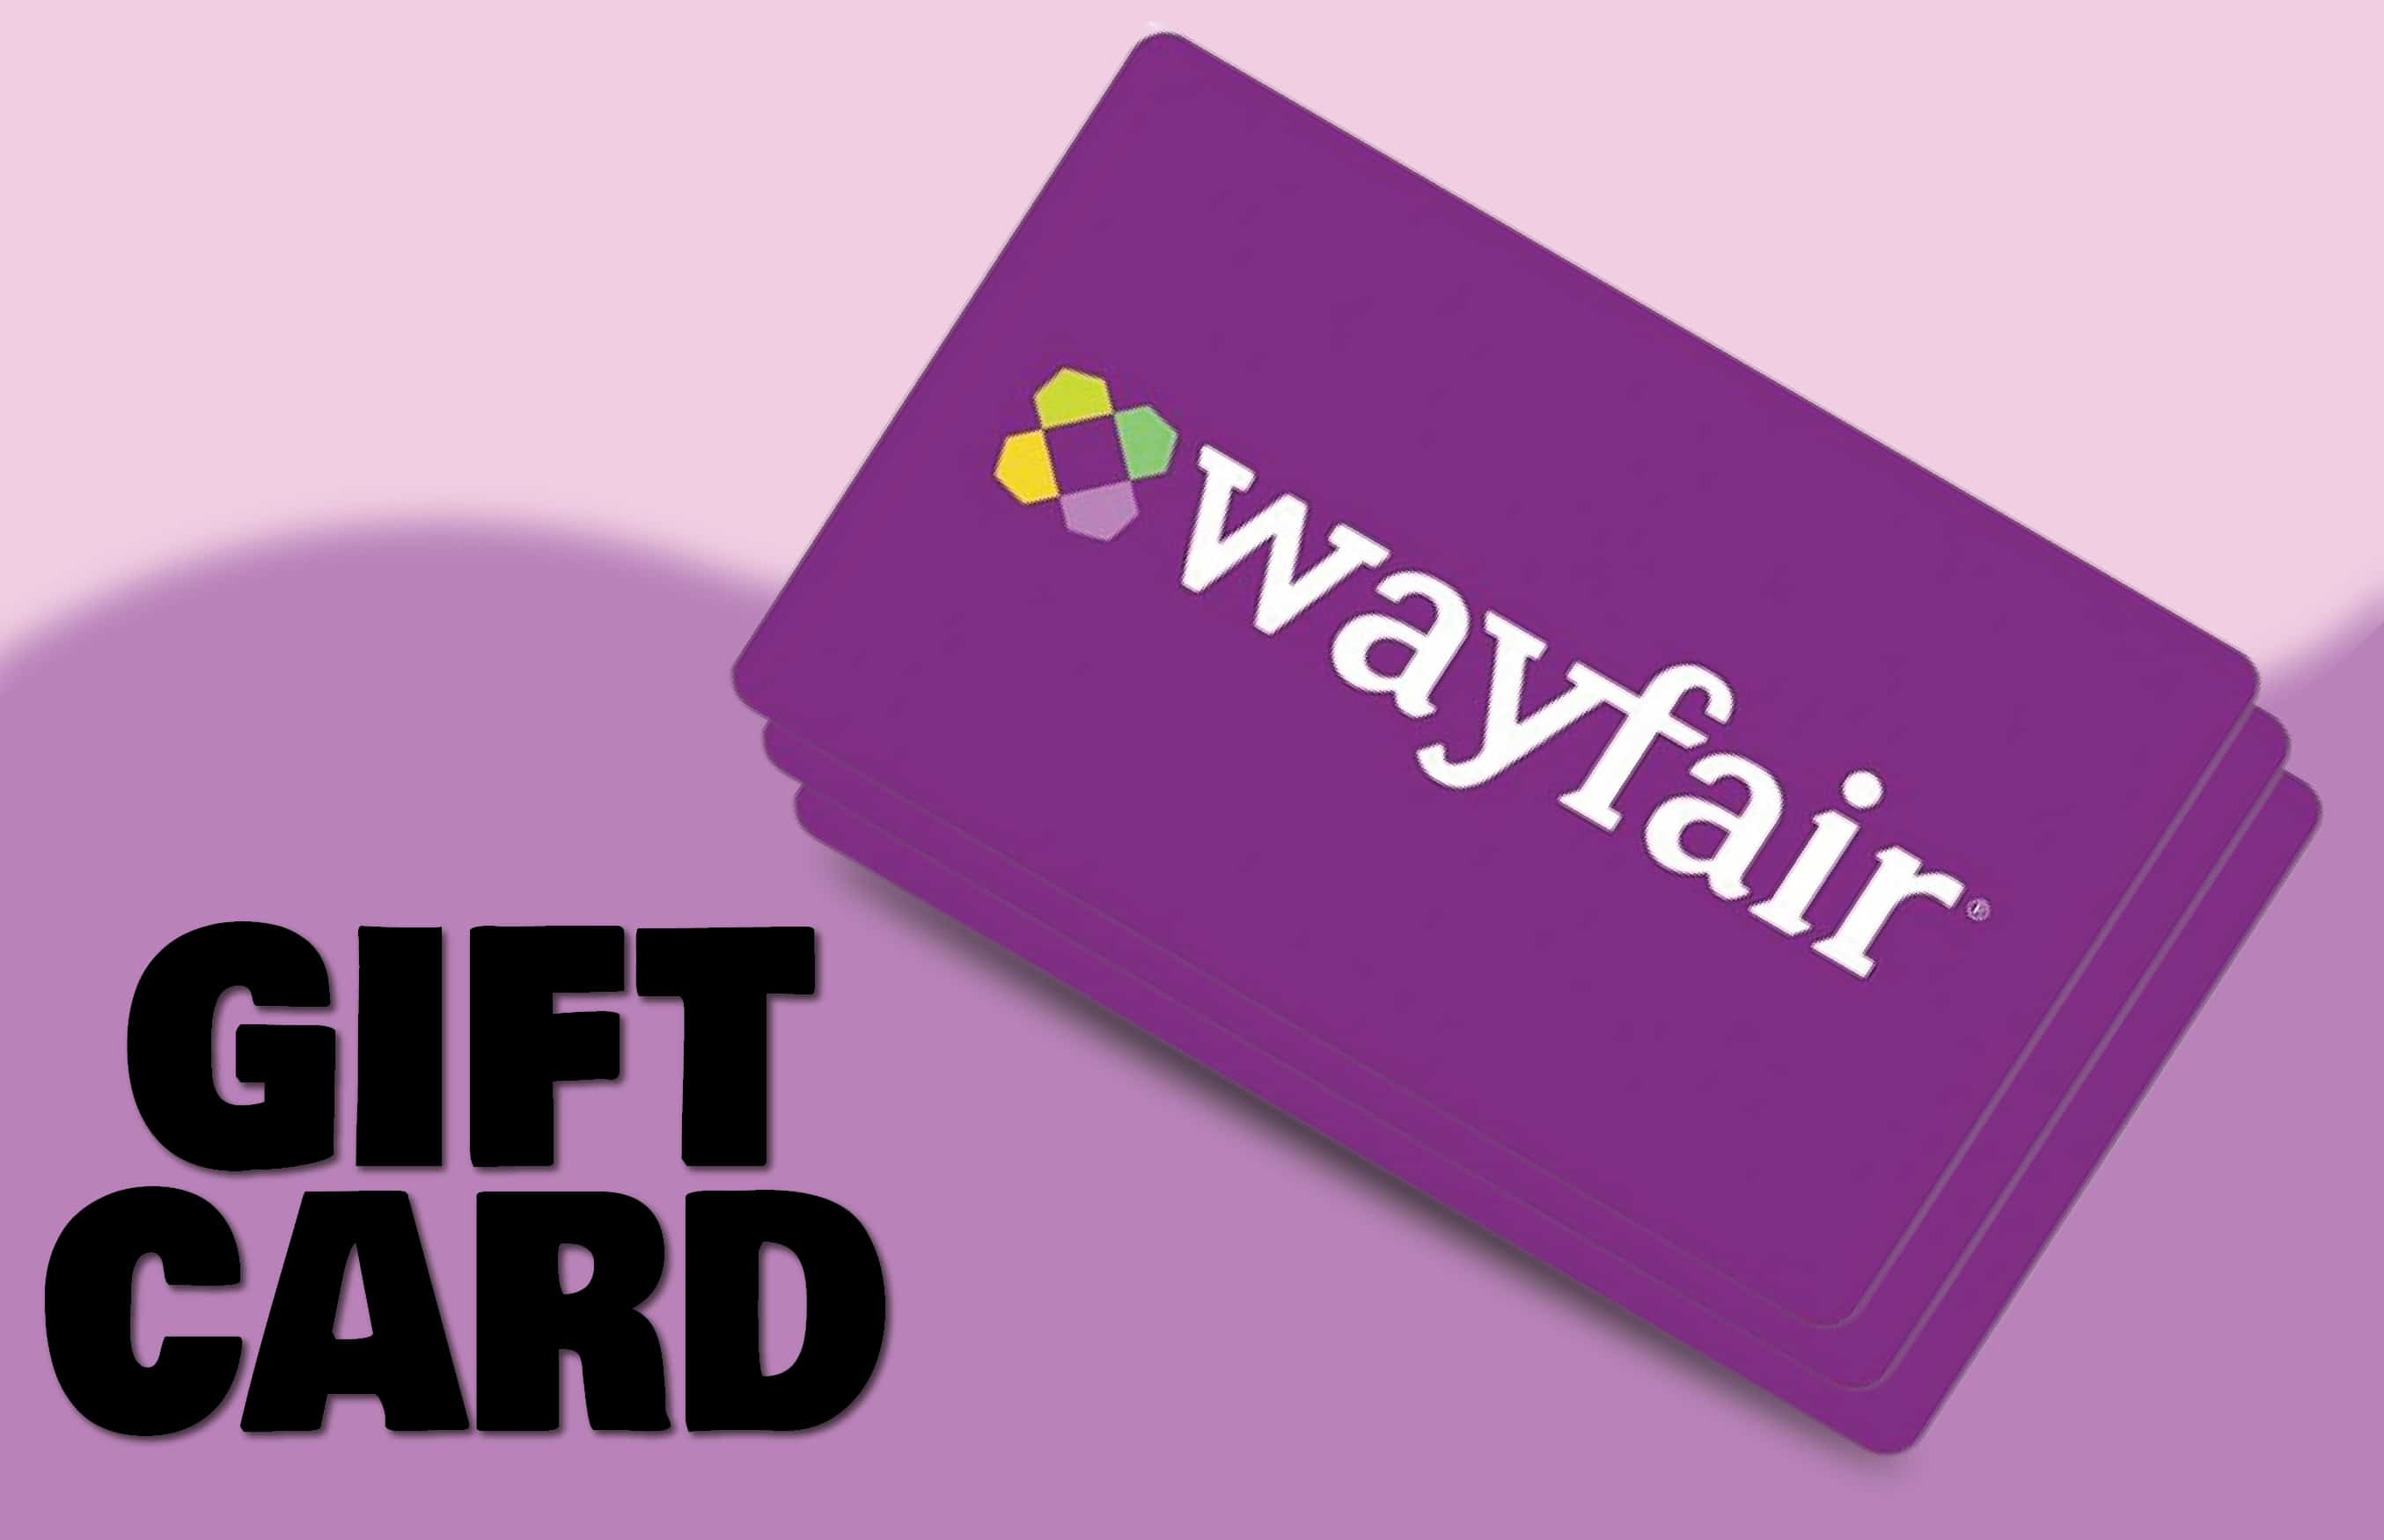 Wayfair Gift Cards Are Too Beneficial To Be Used